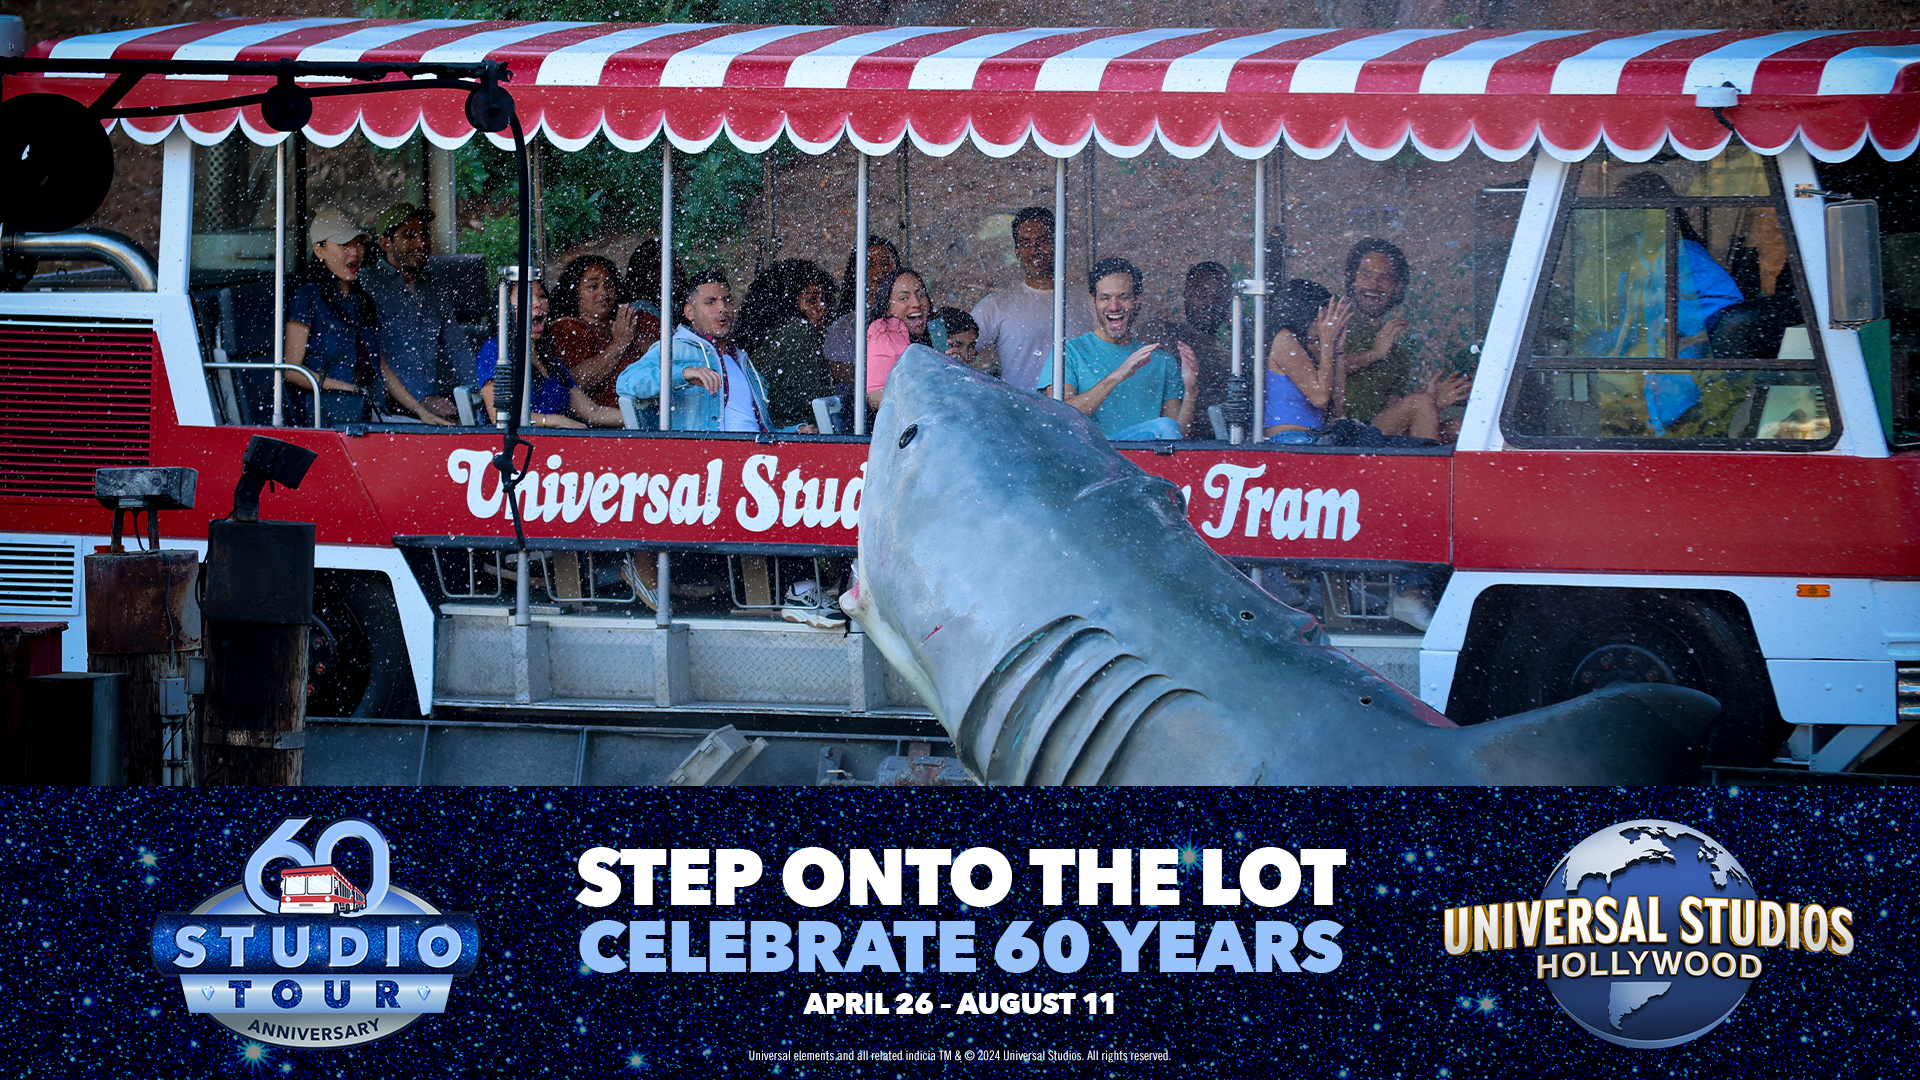 KLOS is giving you a chance to win tickets for four people to Universal Studios Hollywood!